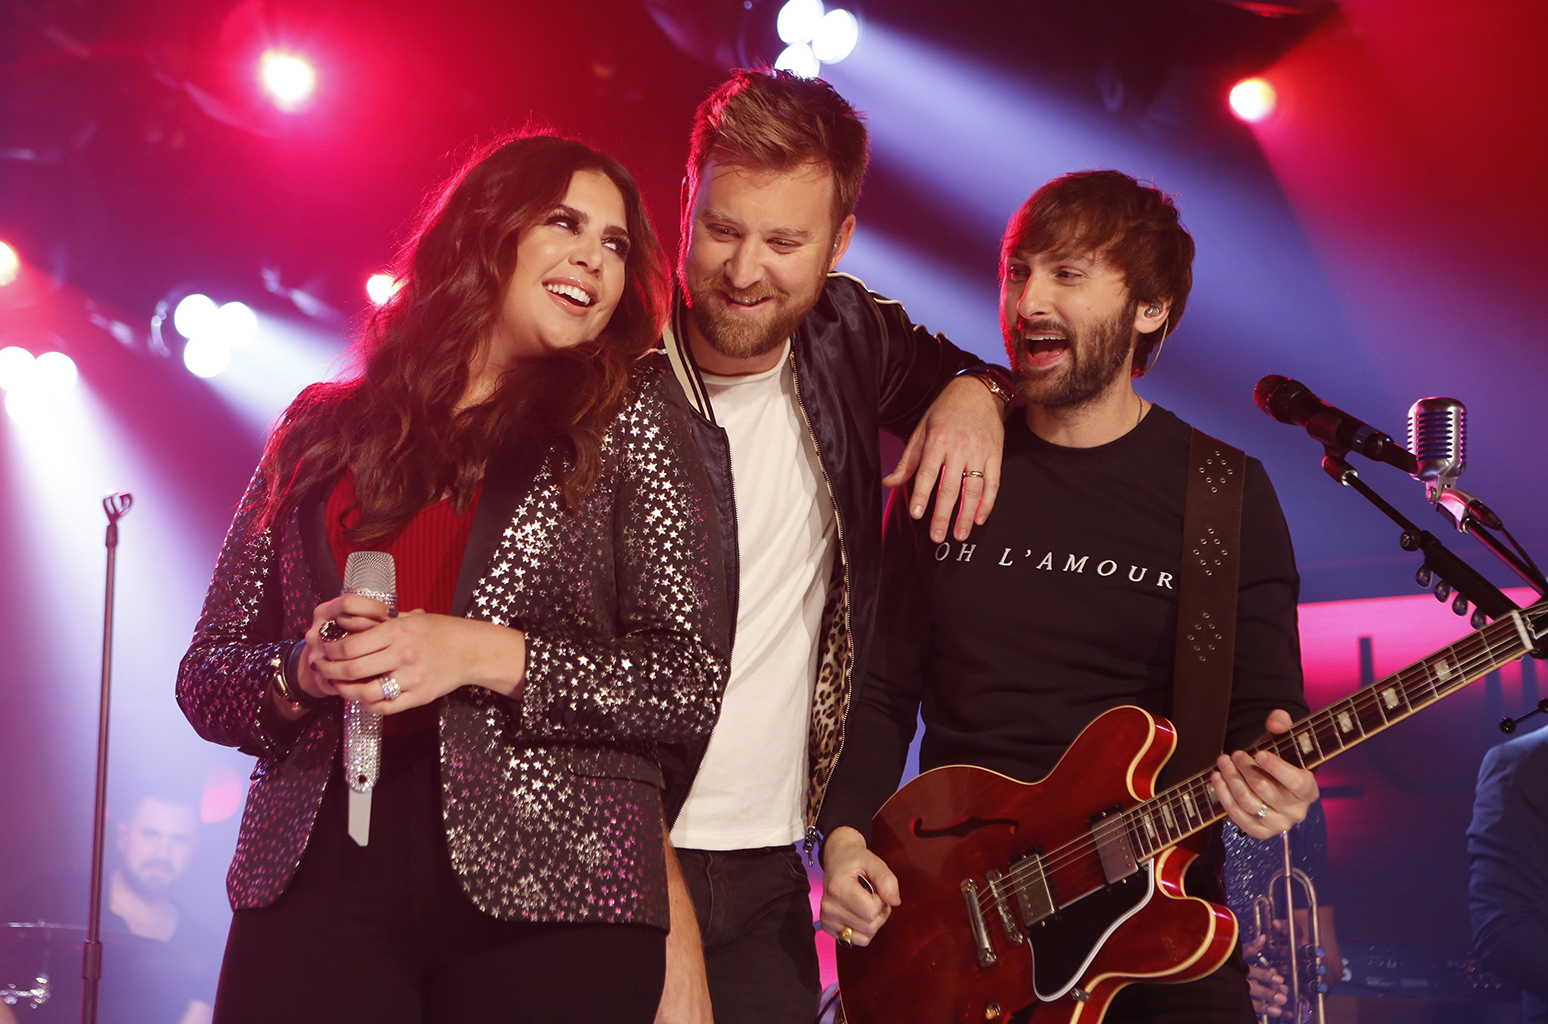 Lady Antebellum, Jake Owen & Maddie and Tae [CANCELLED] at Veterans United Home Loans Amphitheater